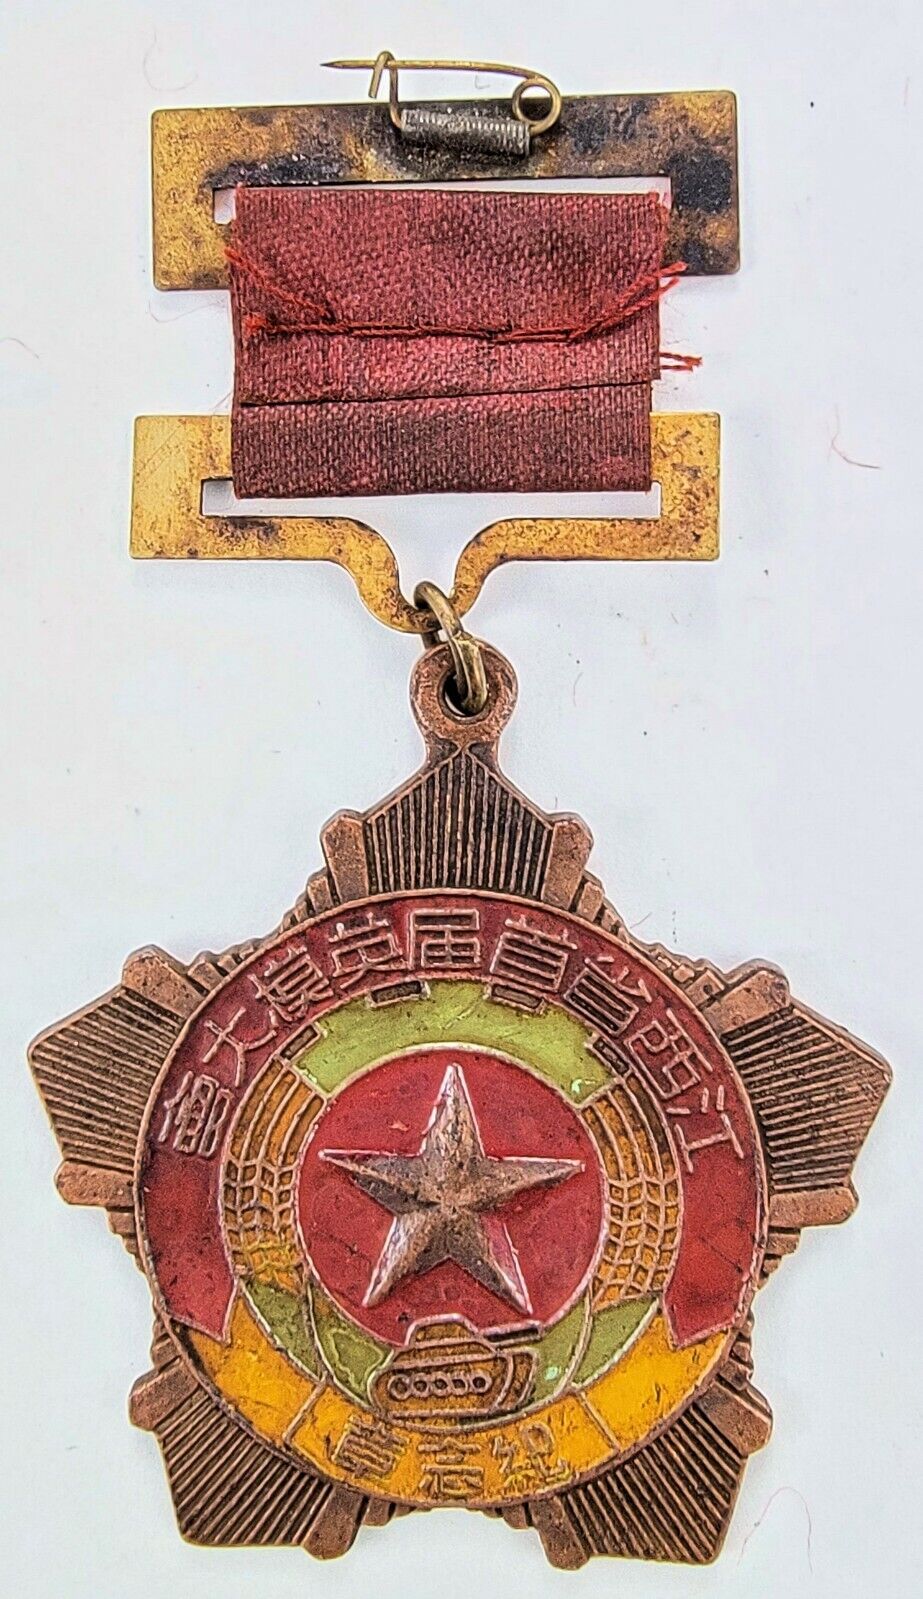 China PLA Army Jiangxi Province Tank Heroic Red First Level Award Pin Medal